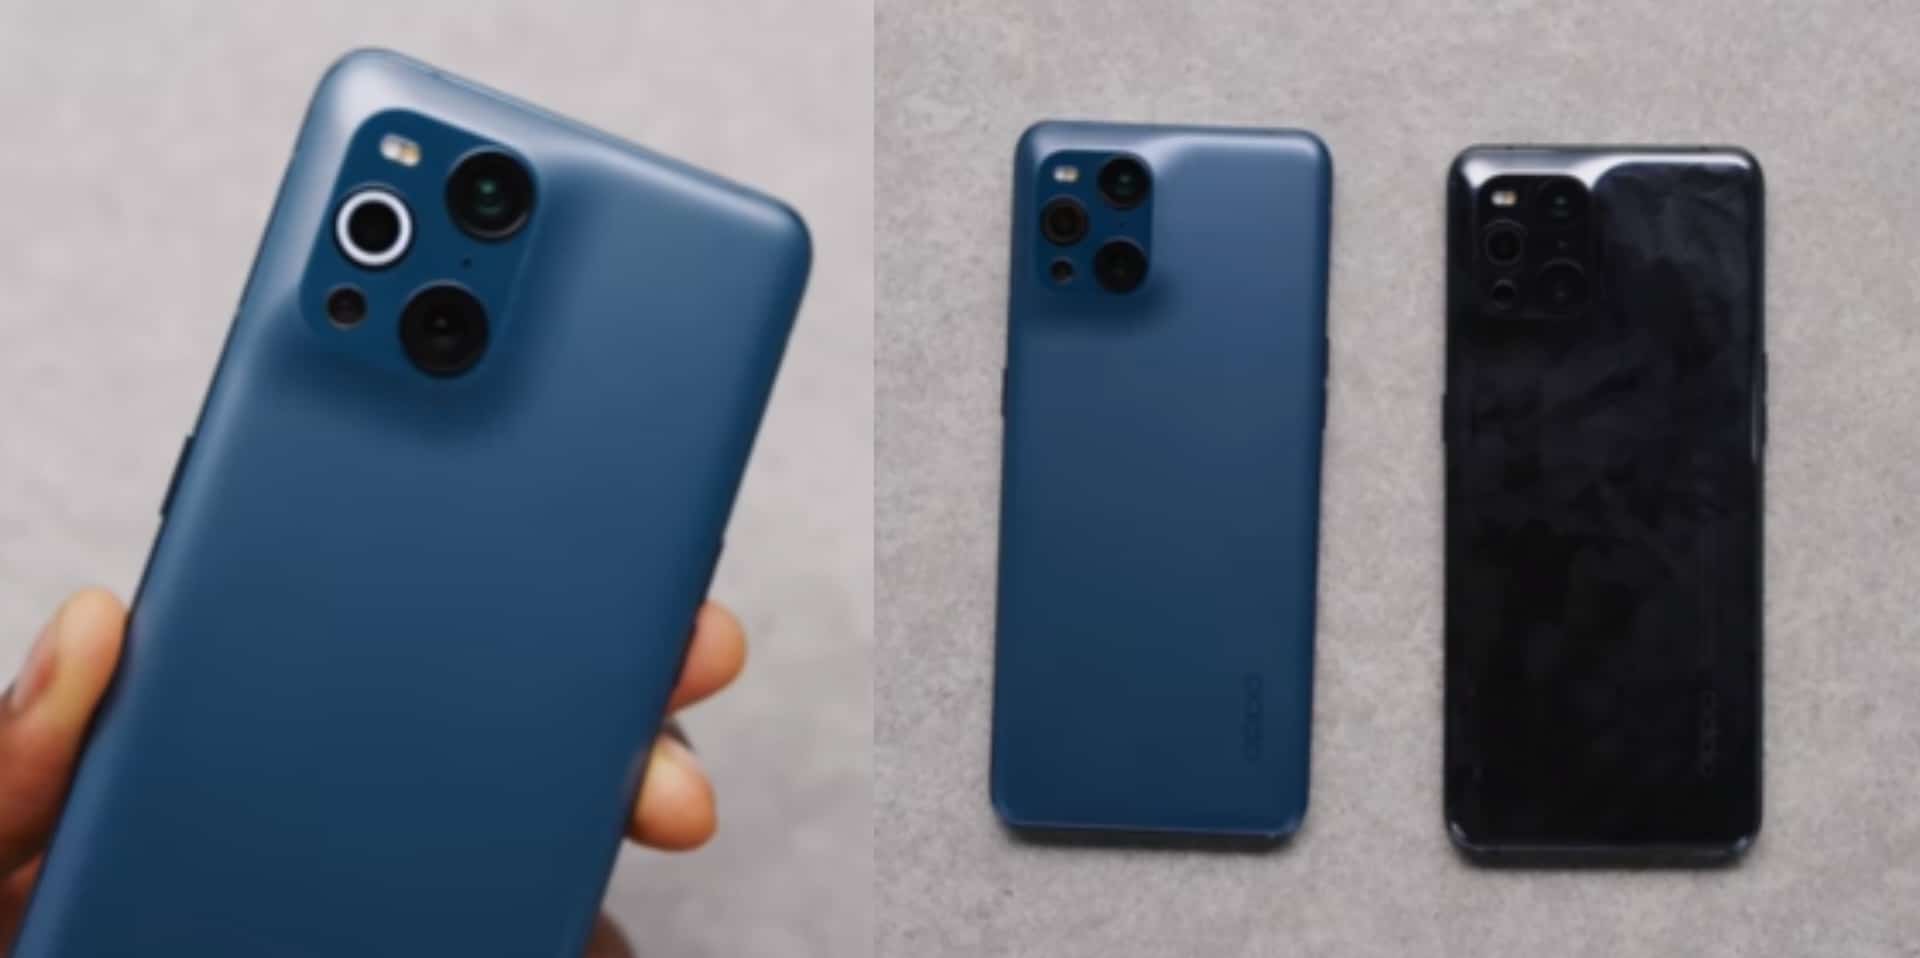 OPPO Find X3 Pro Features a Microscope Camera With 60X Zoom, Takes Super Close Shots